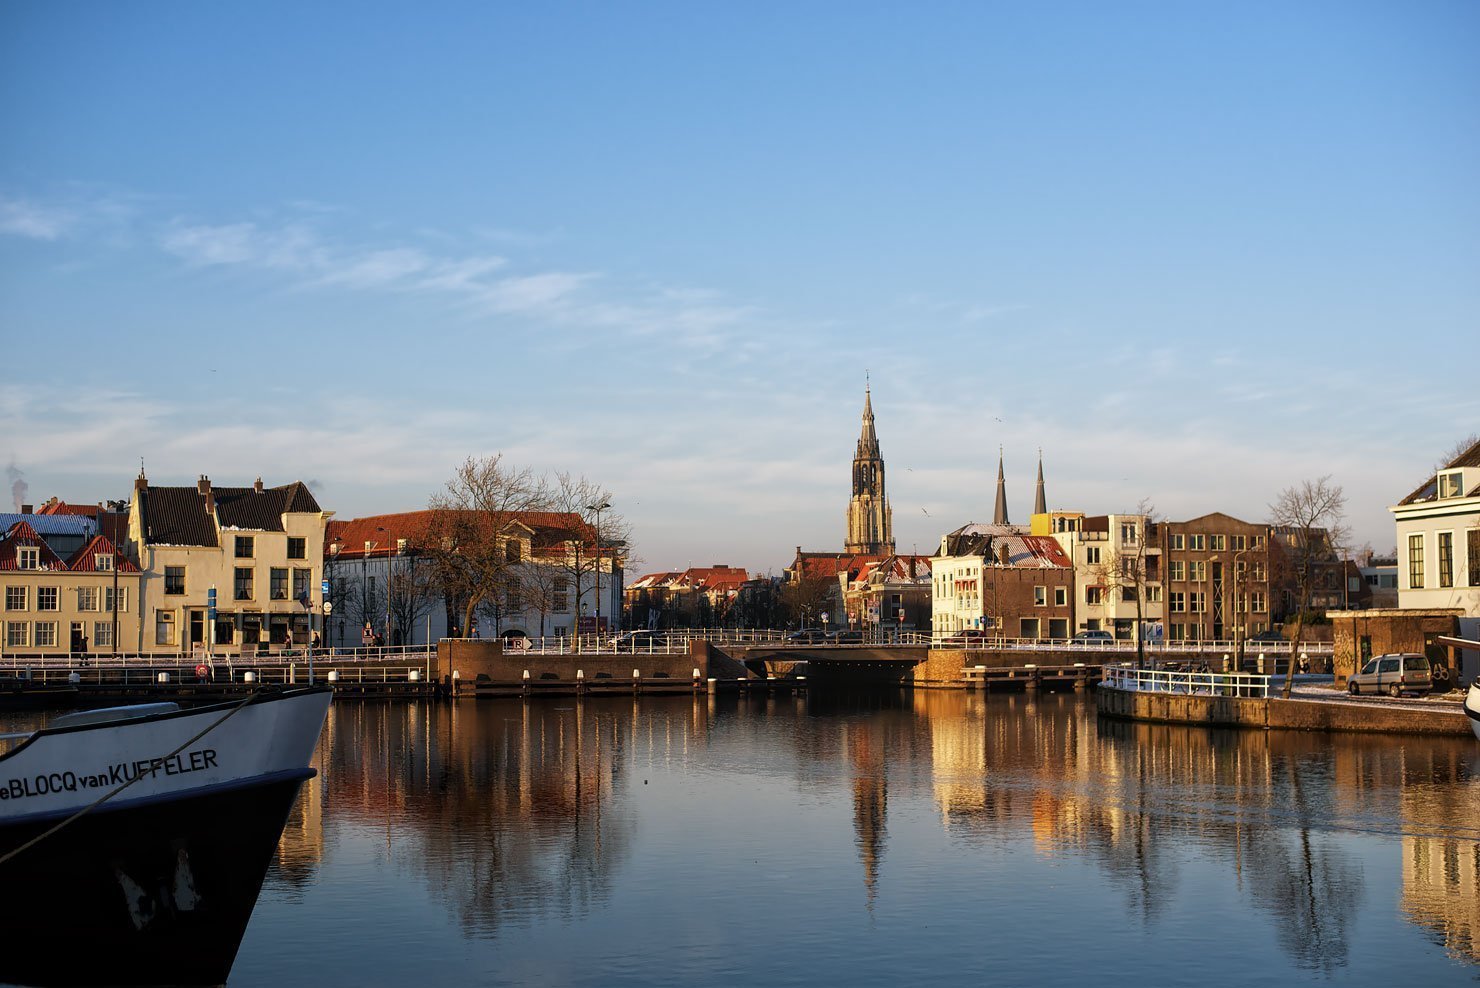 Searching for Vermeer’s View of Delft